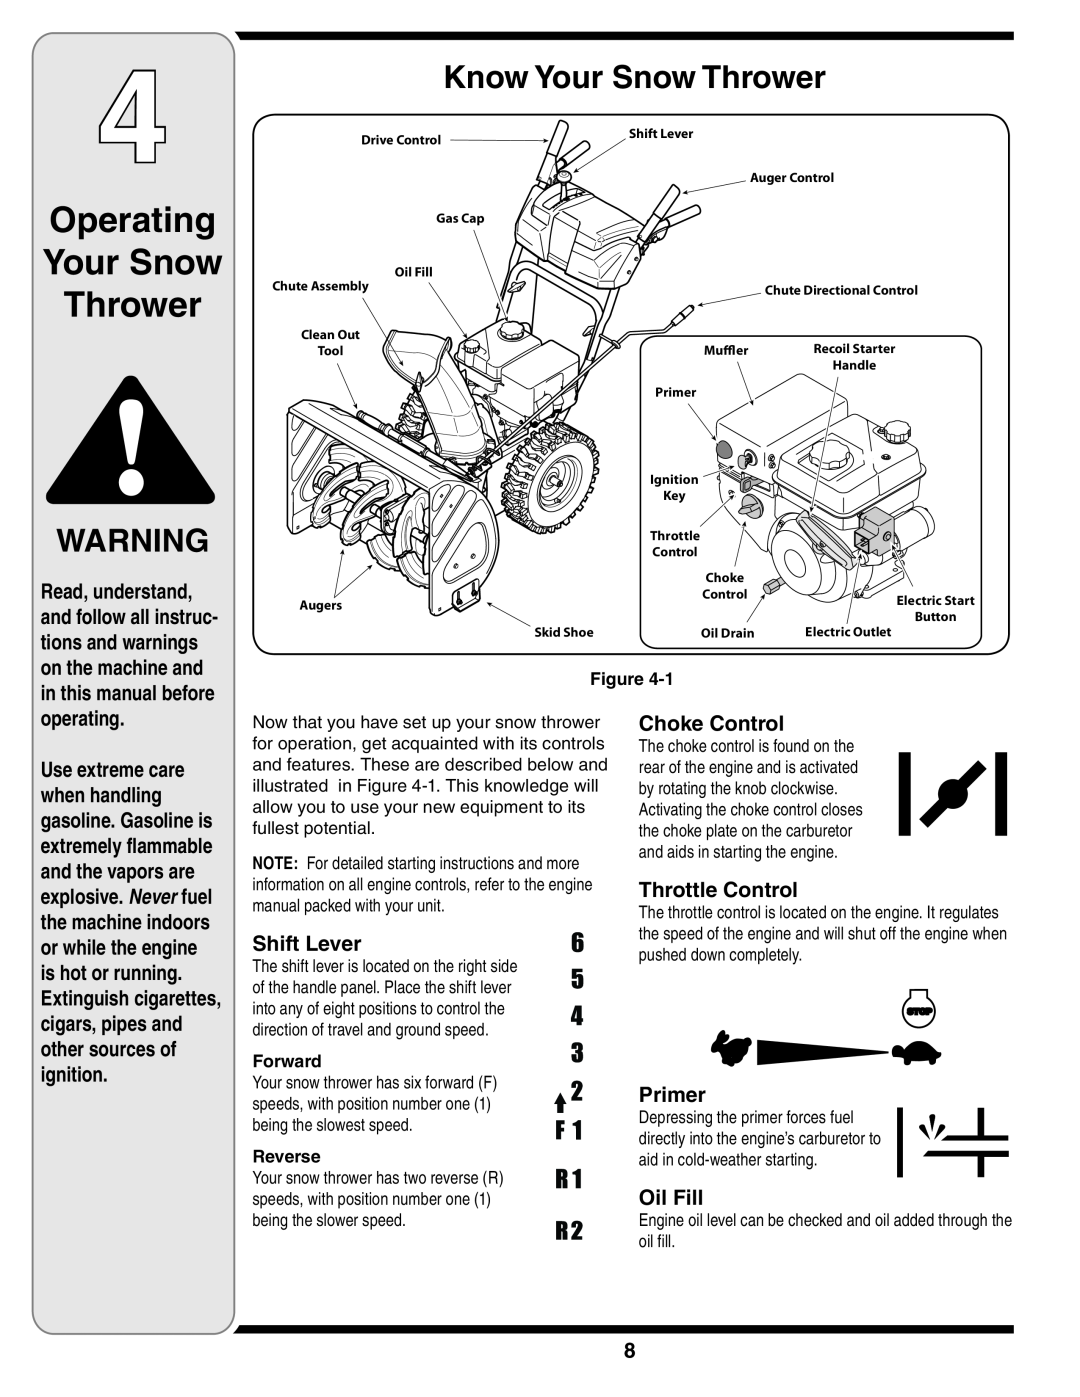 Troy-Bilt 769-03800 warranty Operating Your Snow Thrower, Know Your Snow Thrower, Figure, Forward, Reverse 